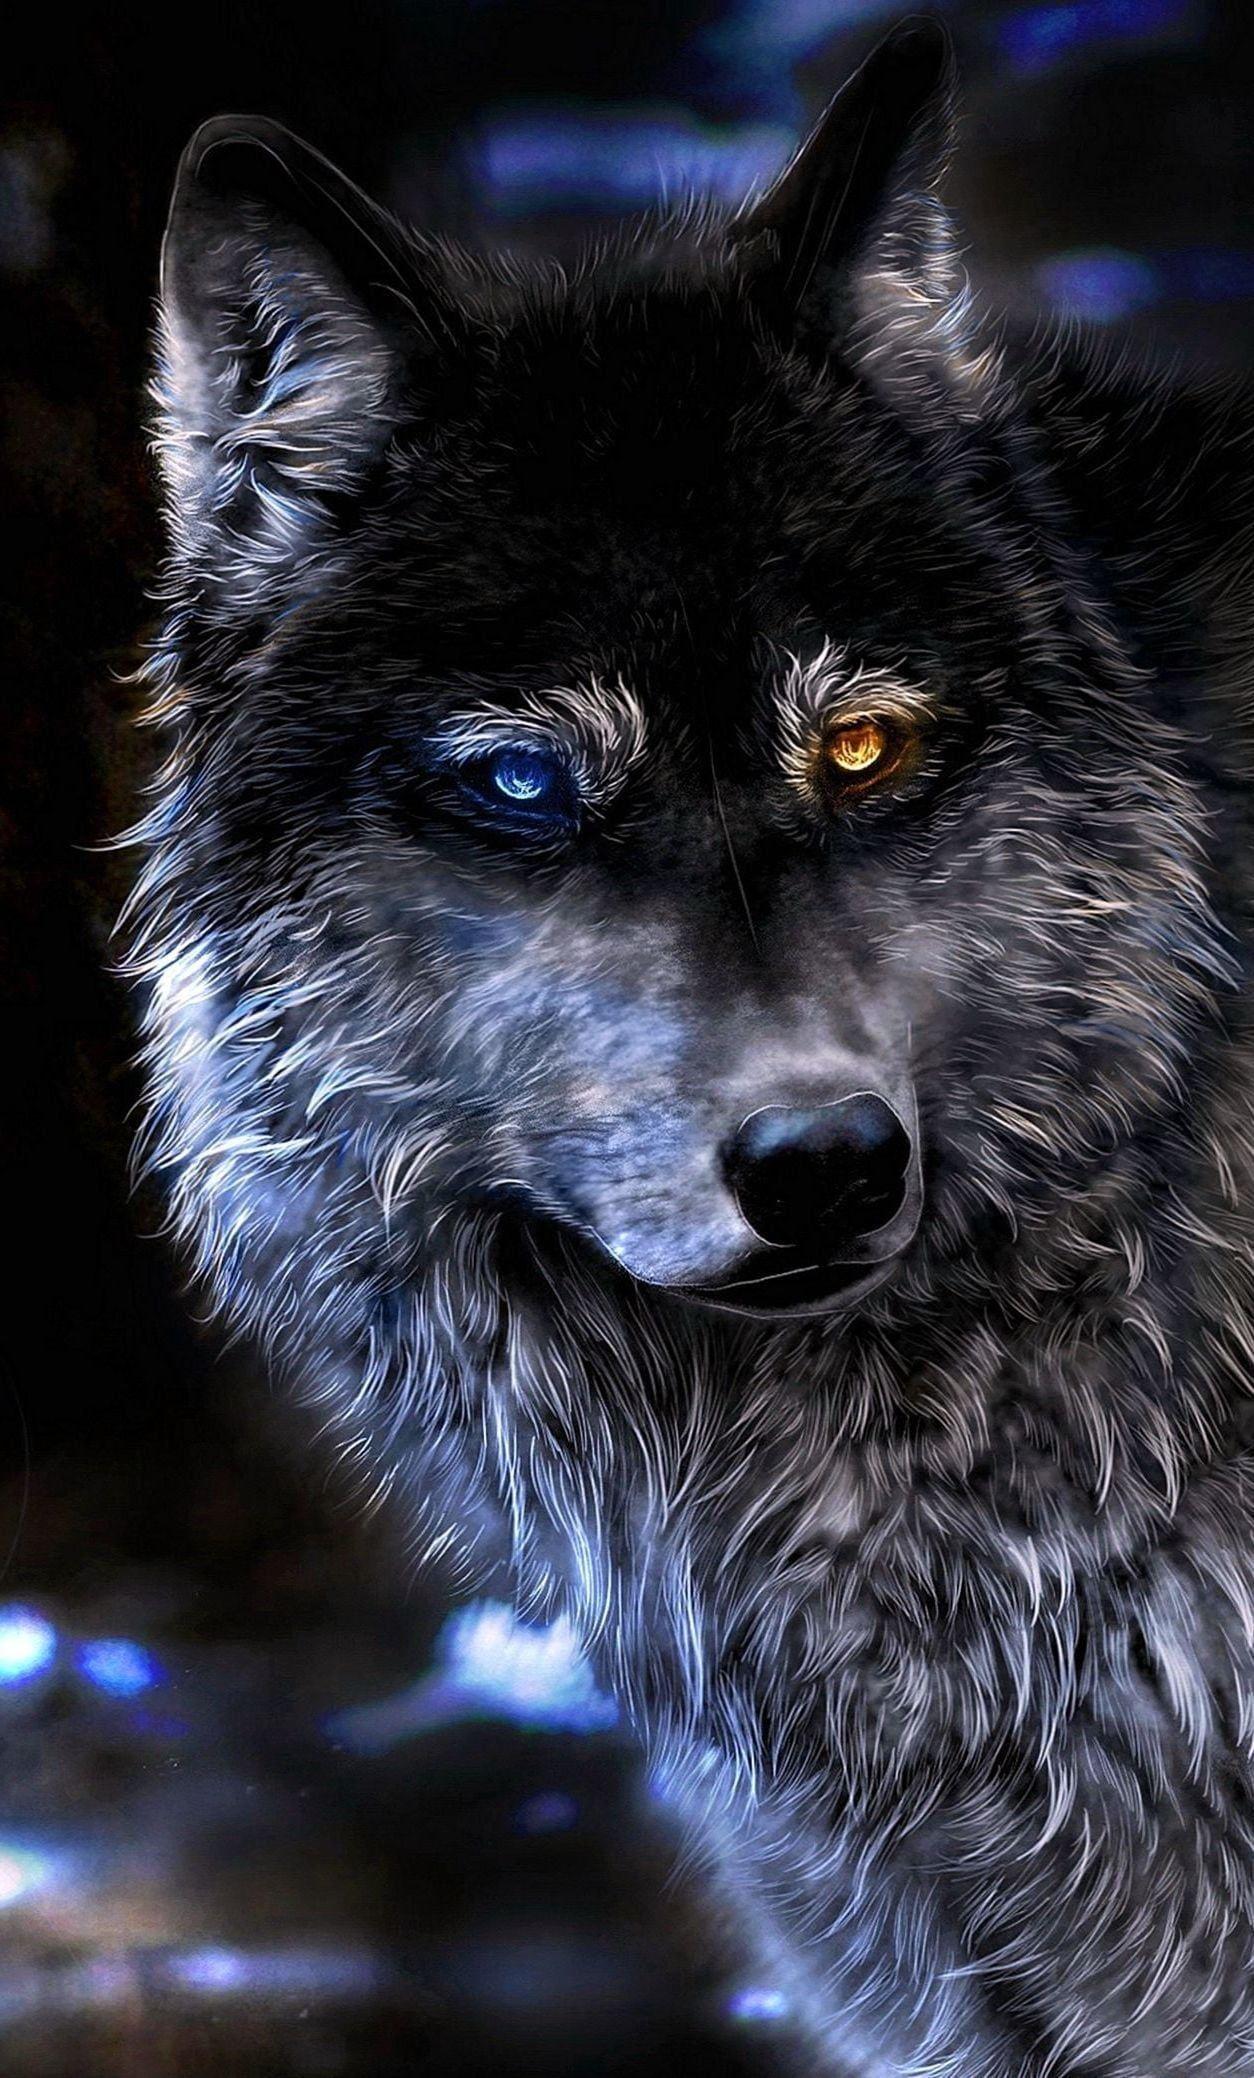 Black Wolf 4K Wallpapers - Top Free Black Wolf 4K Backgrounds ...